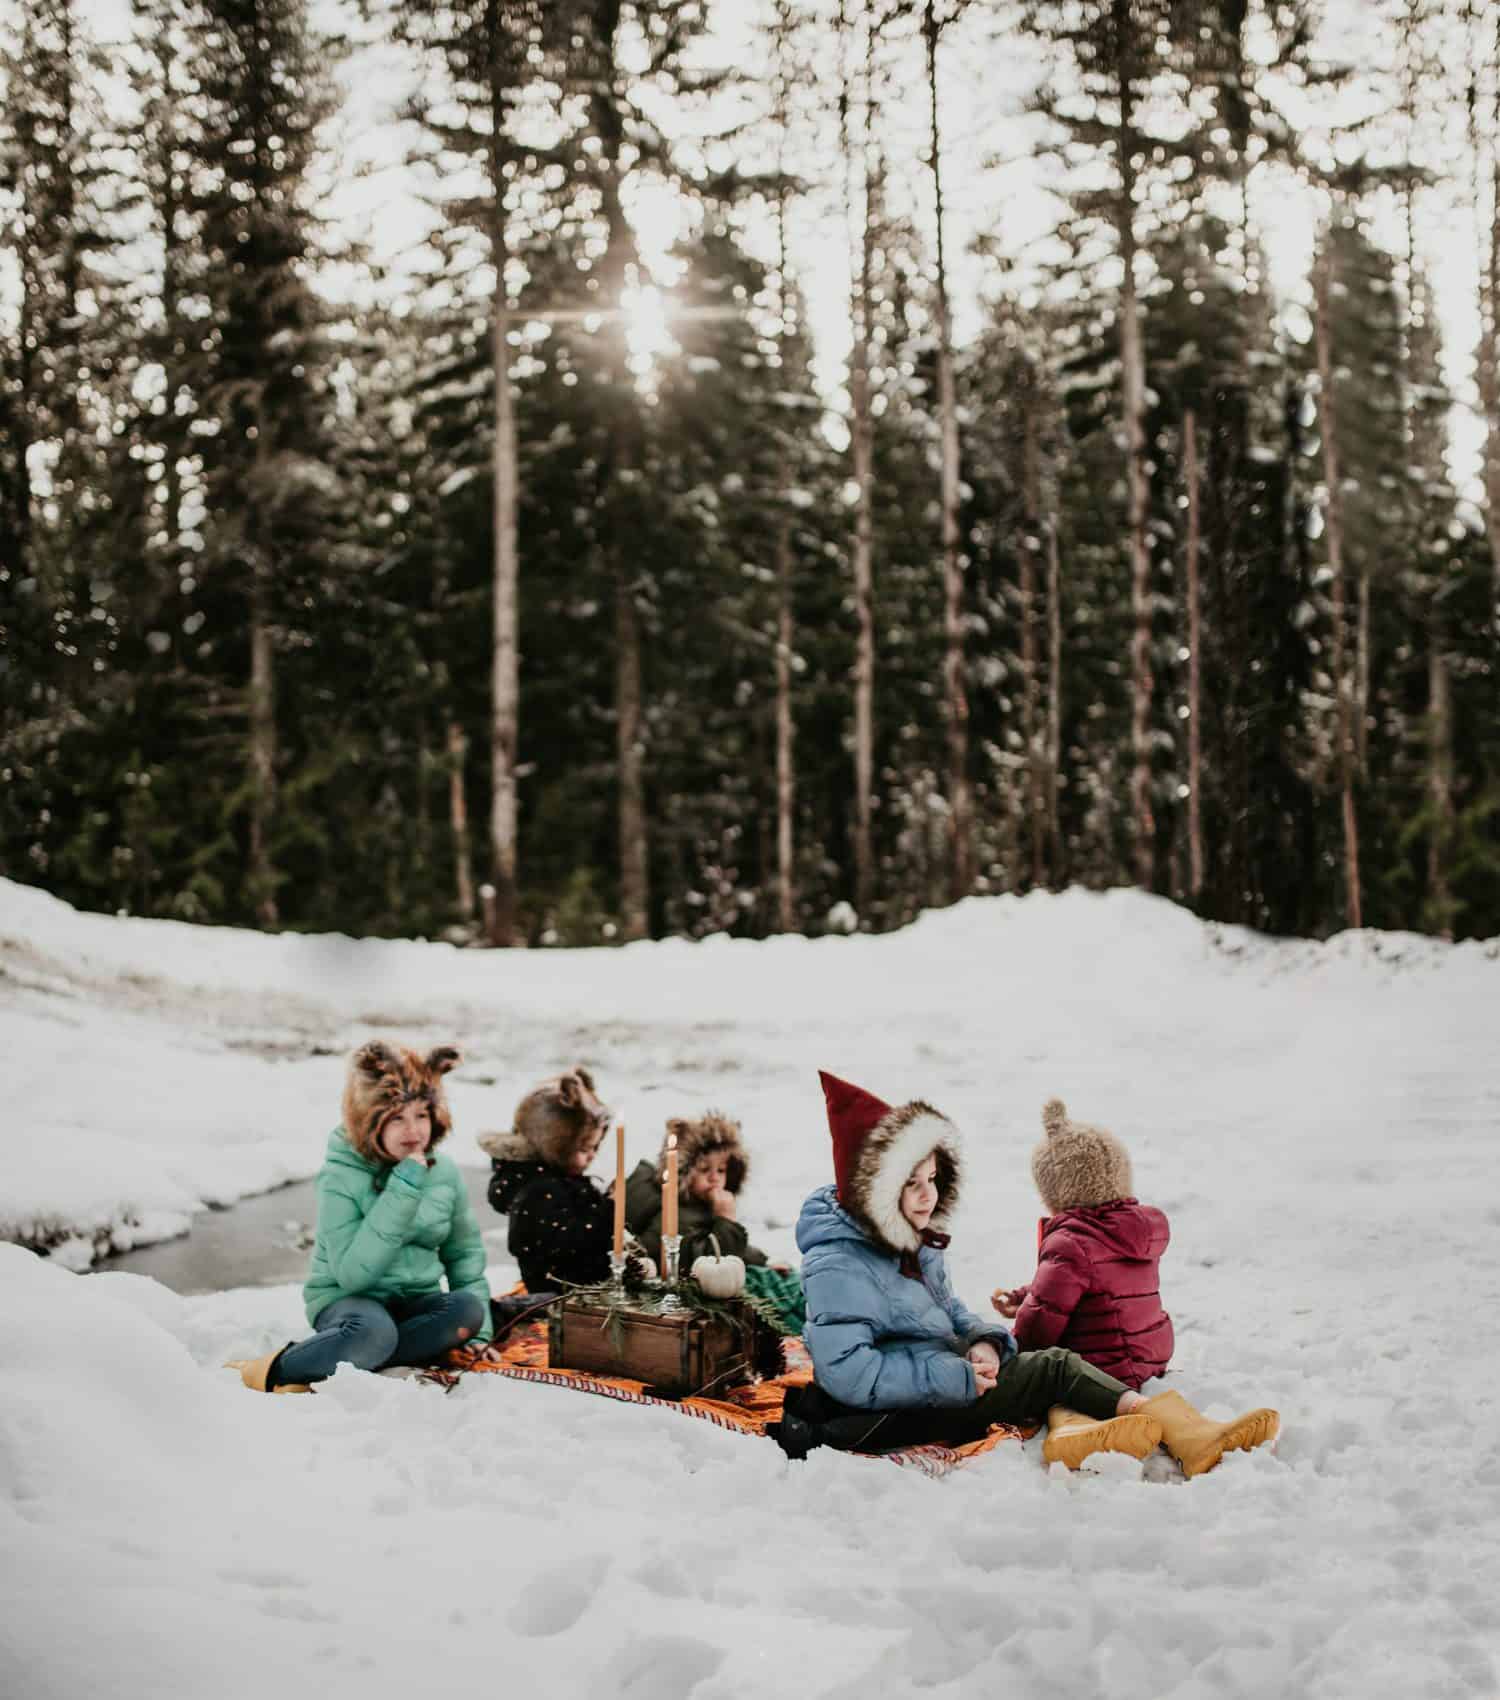 outdoor picnic - snow day activities for kids